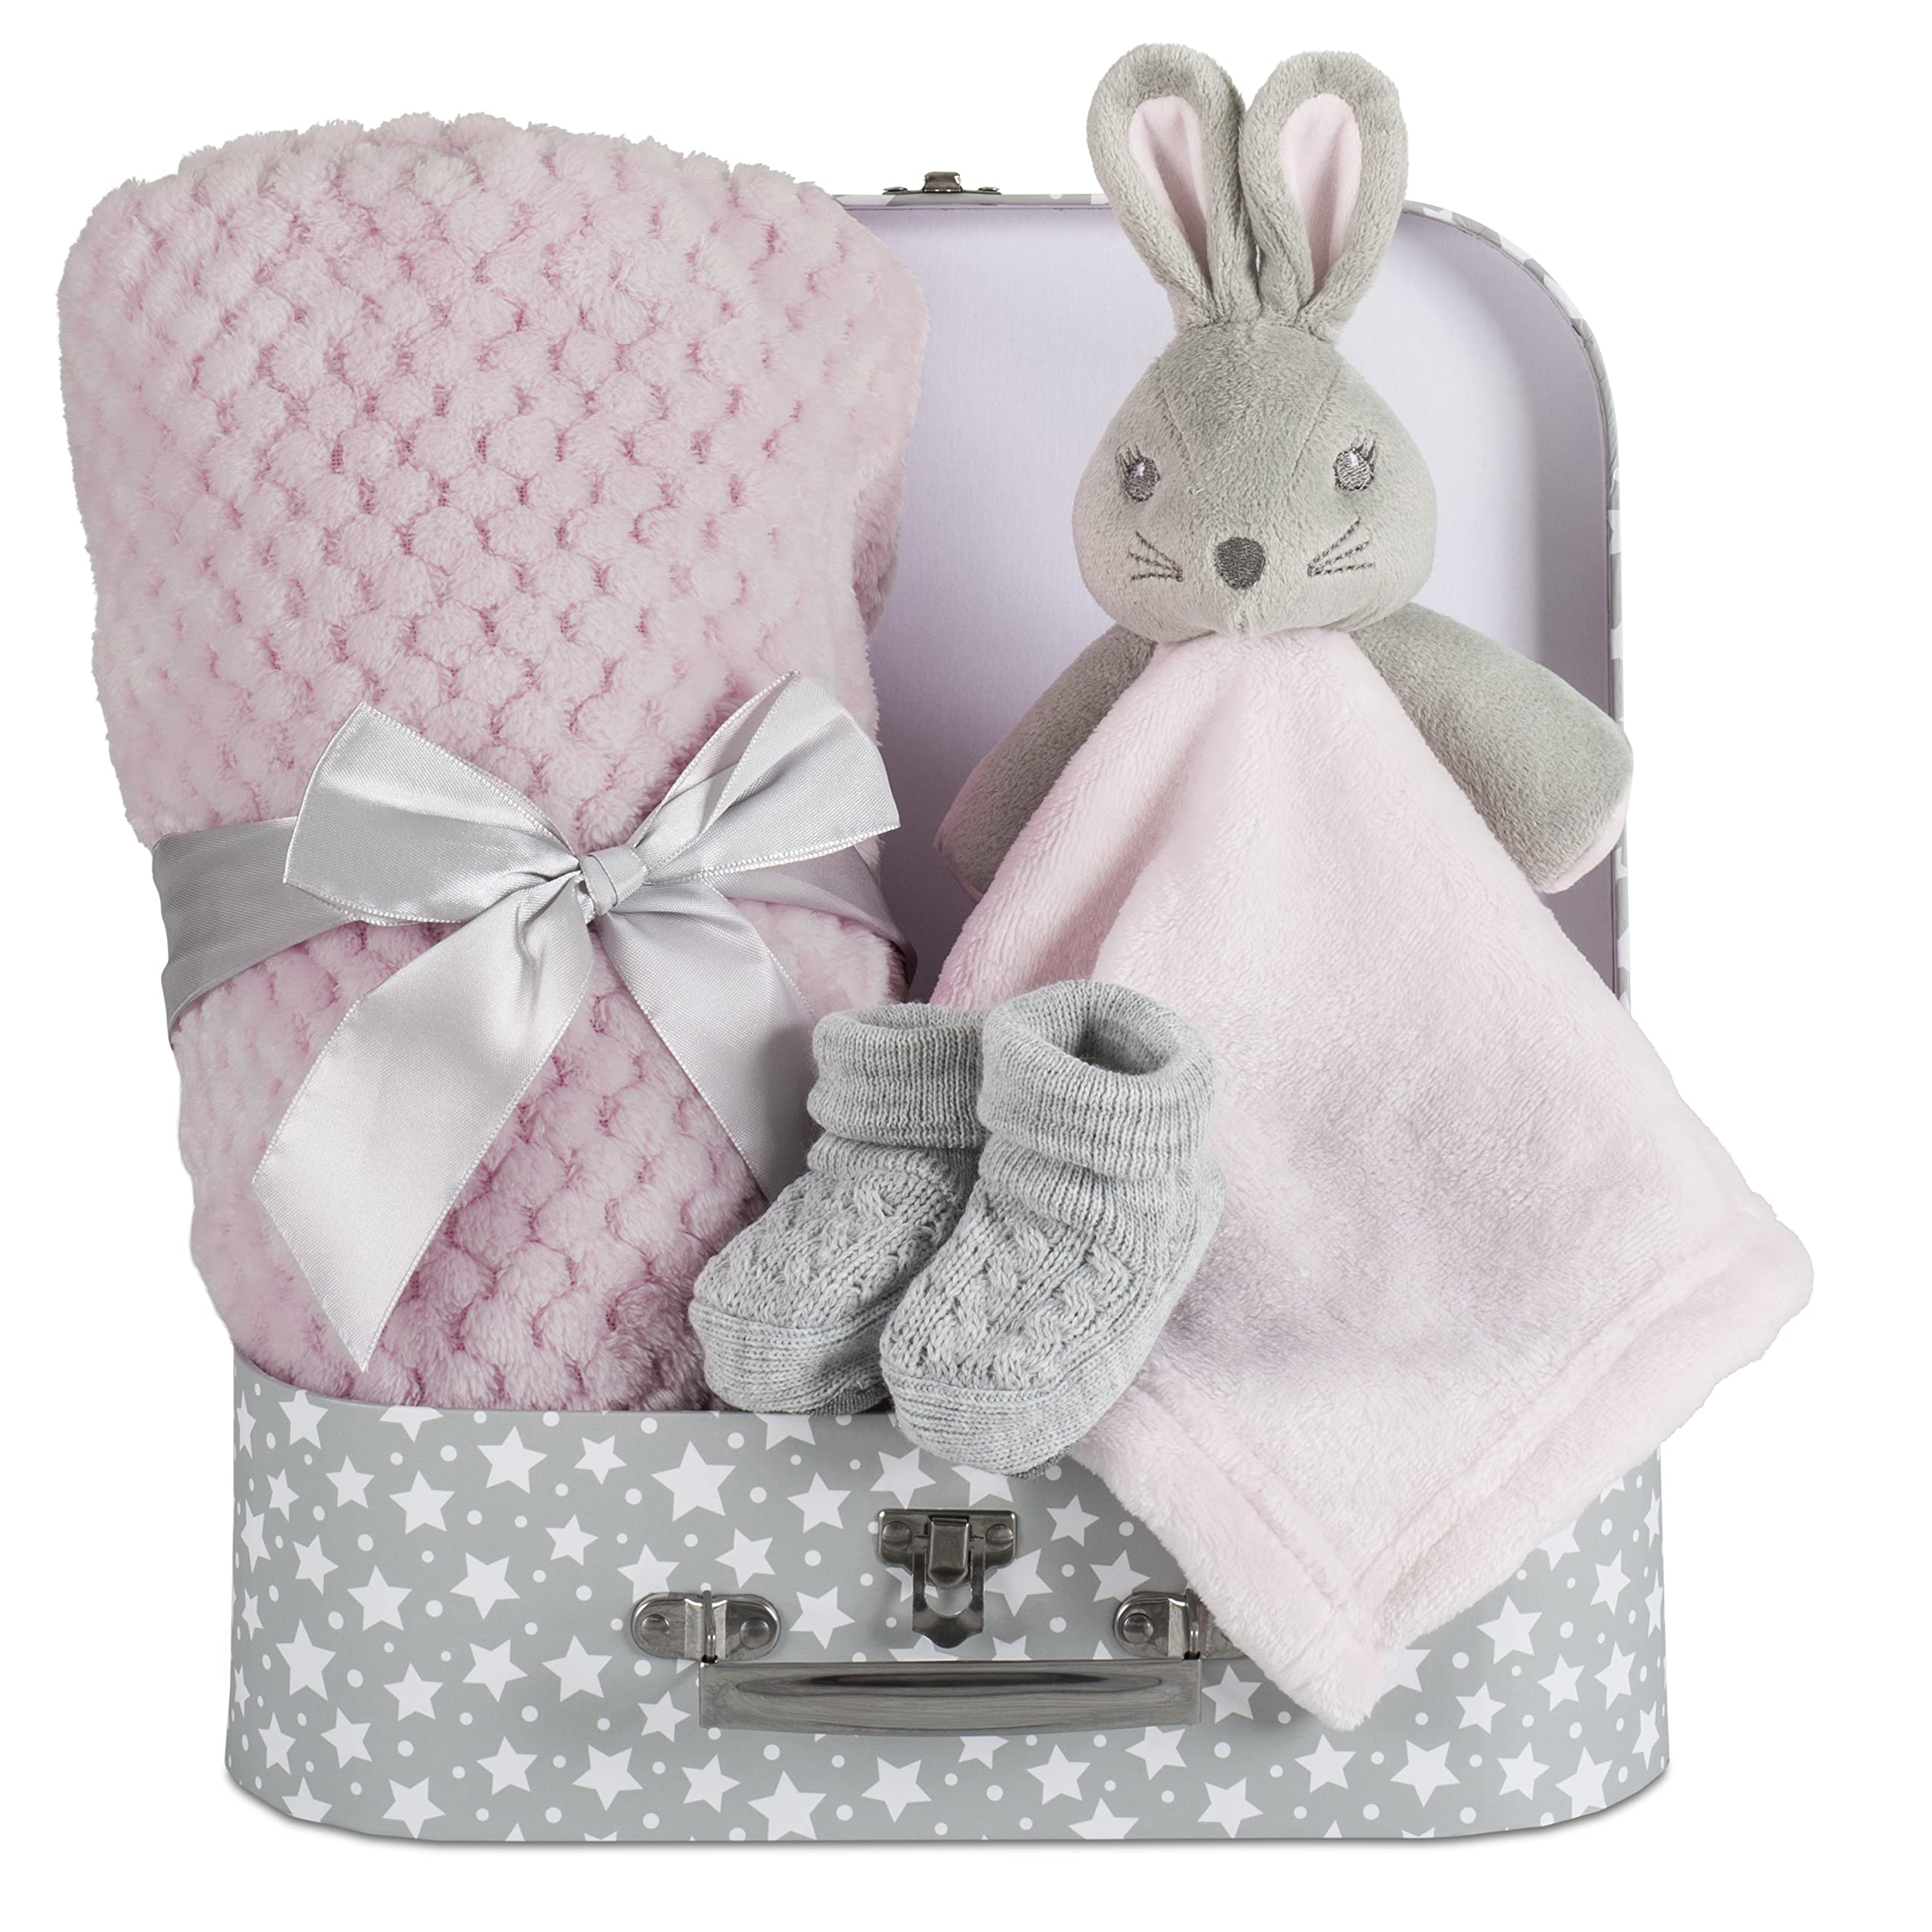 Shop Newborn Baby Girl Gifts Online At Affordable Prices